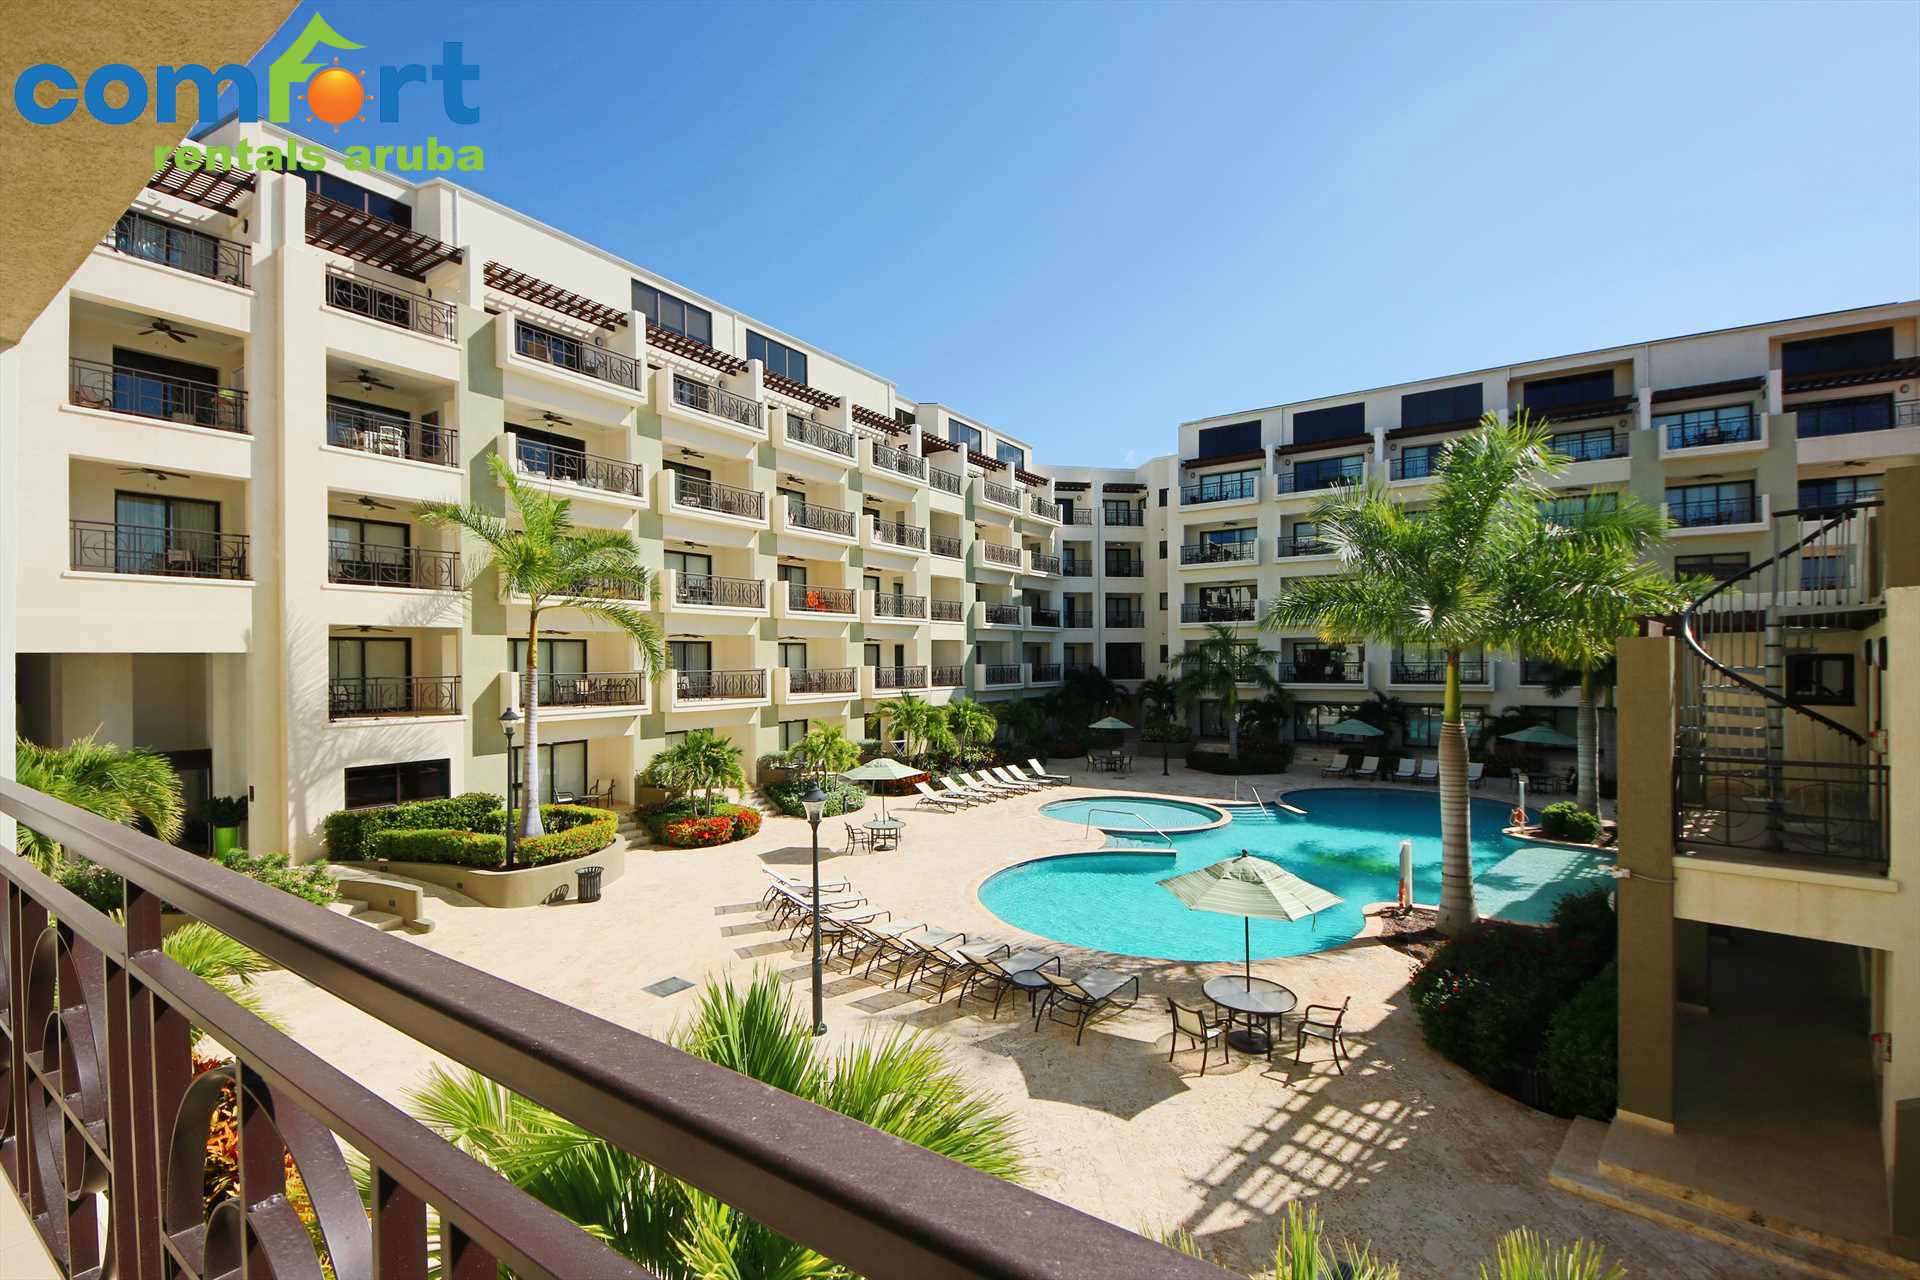 Sit on your balcony and enjoy your amazing pool view!